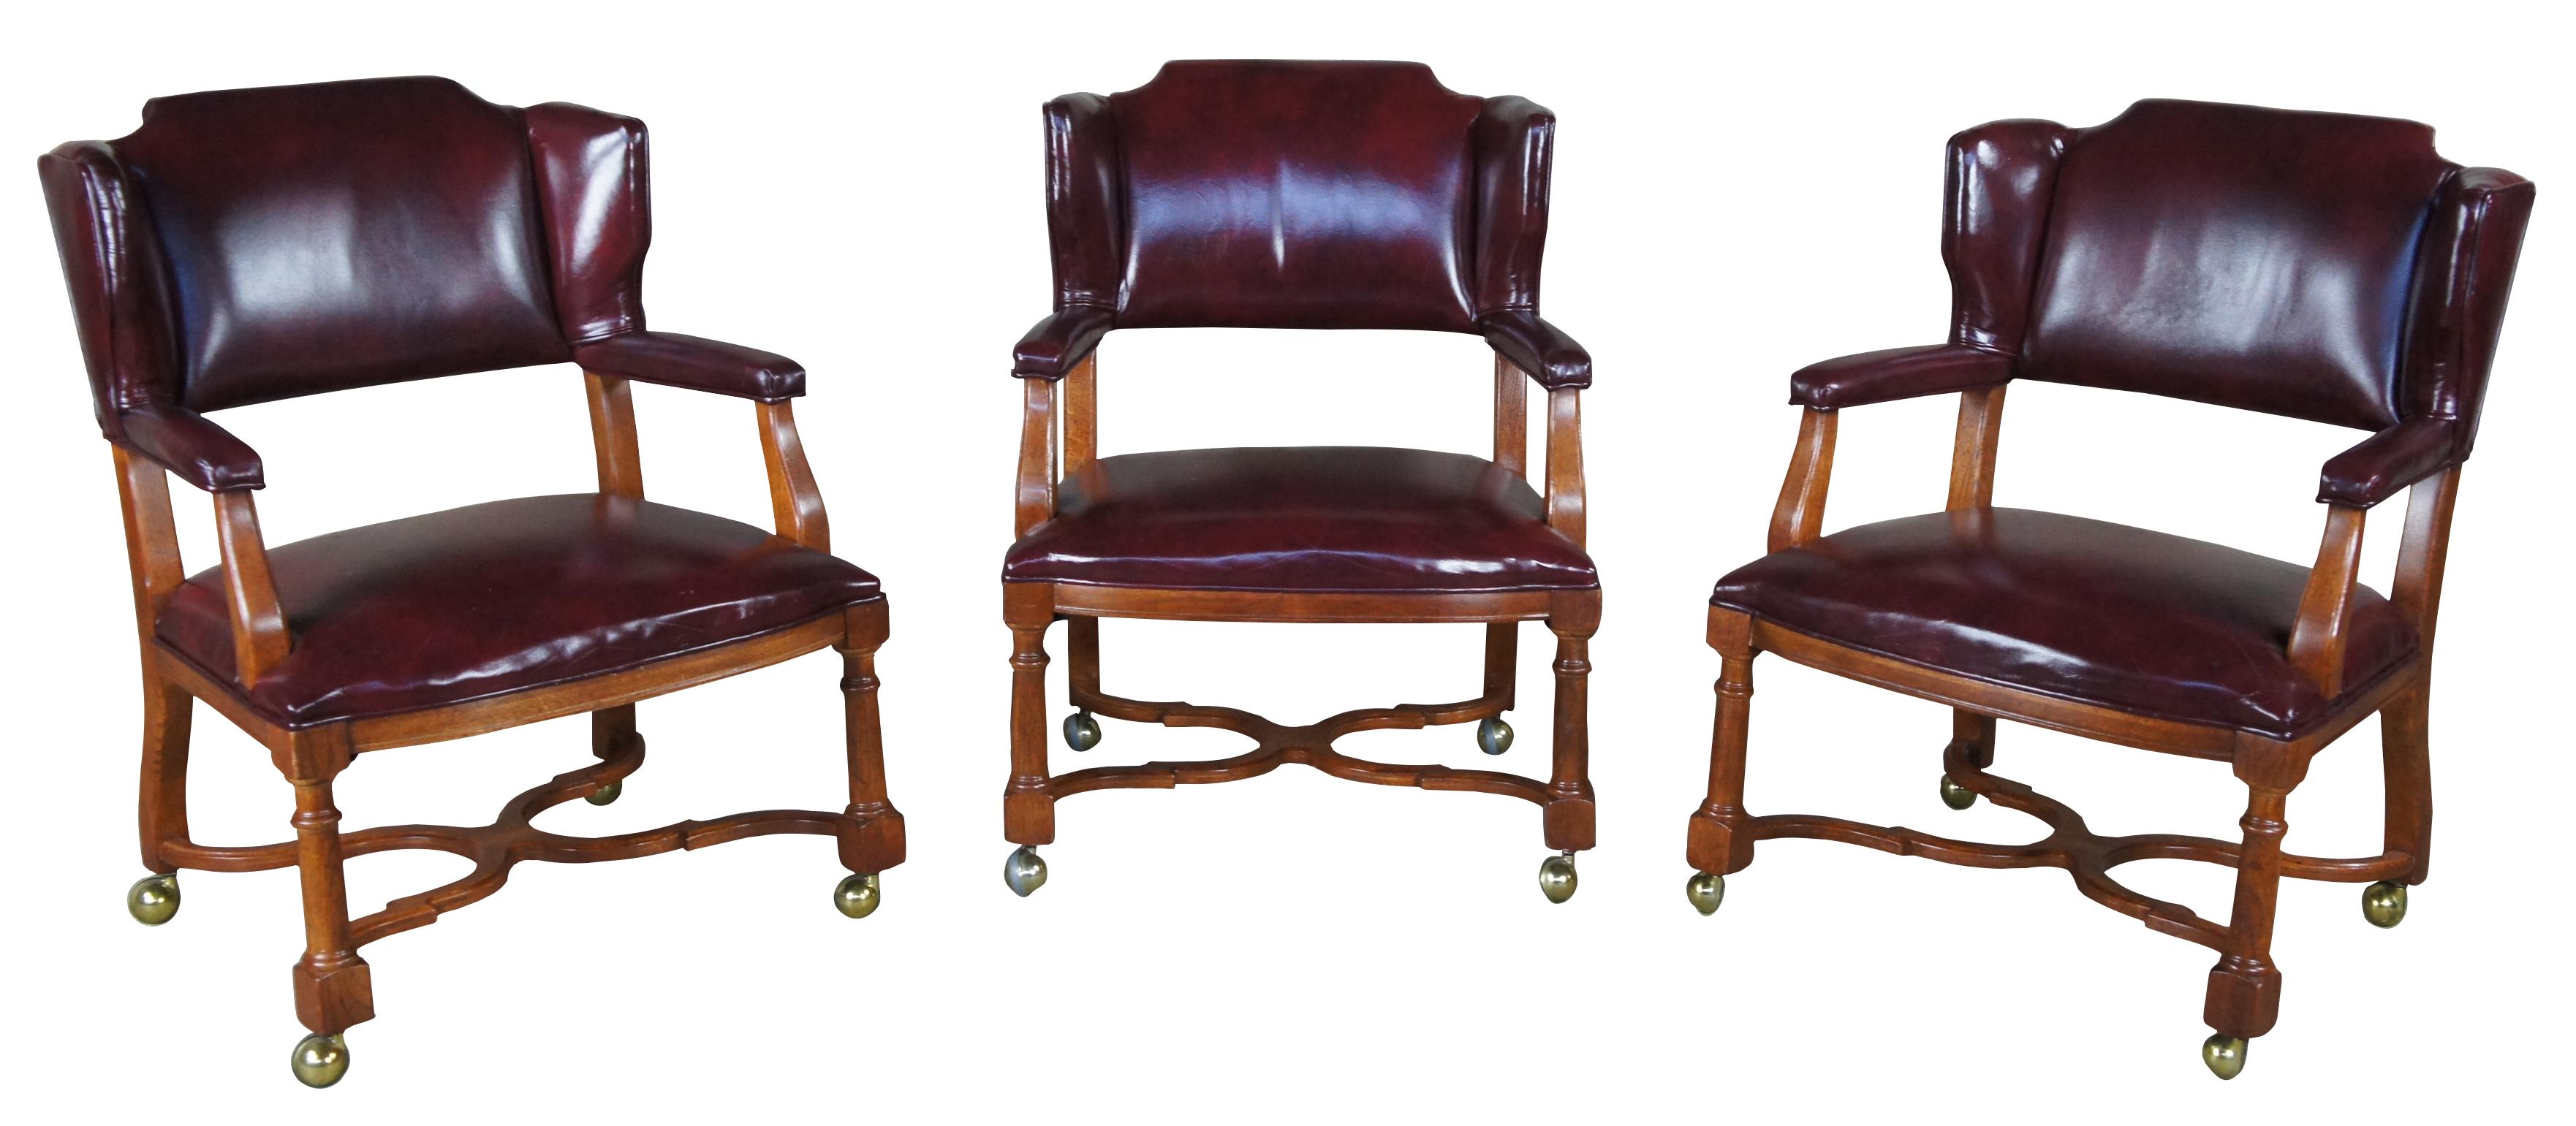 An exquisite trio of mid century wingback office, game or dining chairs by Hickory Manufacturing Company. Executive styling with oak frame upholstered in a red burgundy leather. Features padded arms, turned legs and a Tuscan inspired H stretcher.